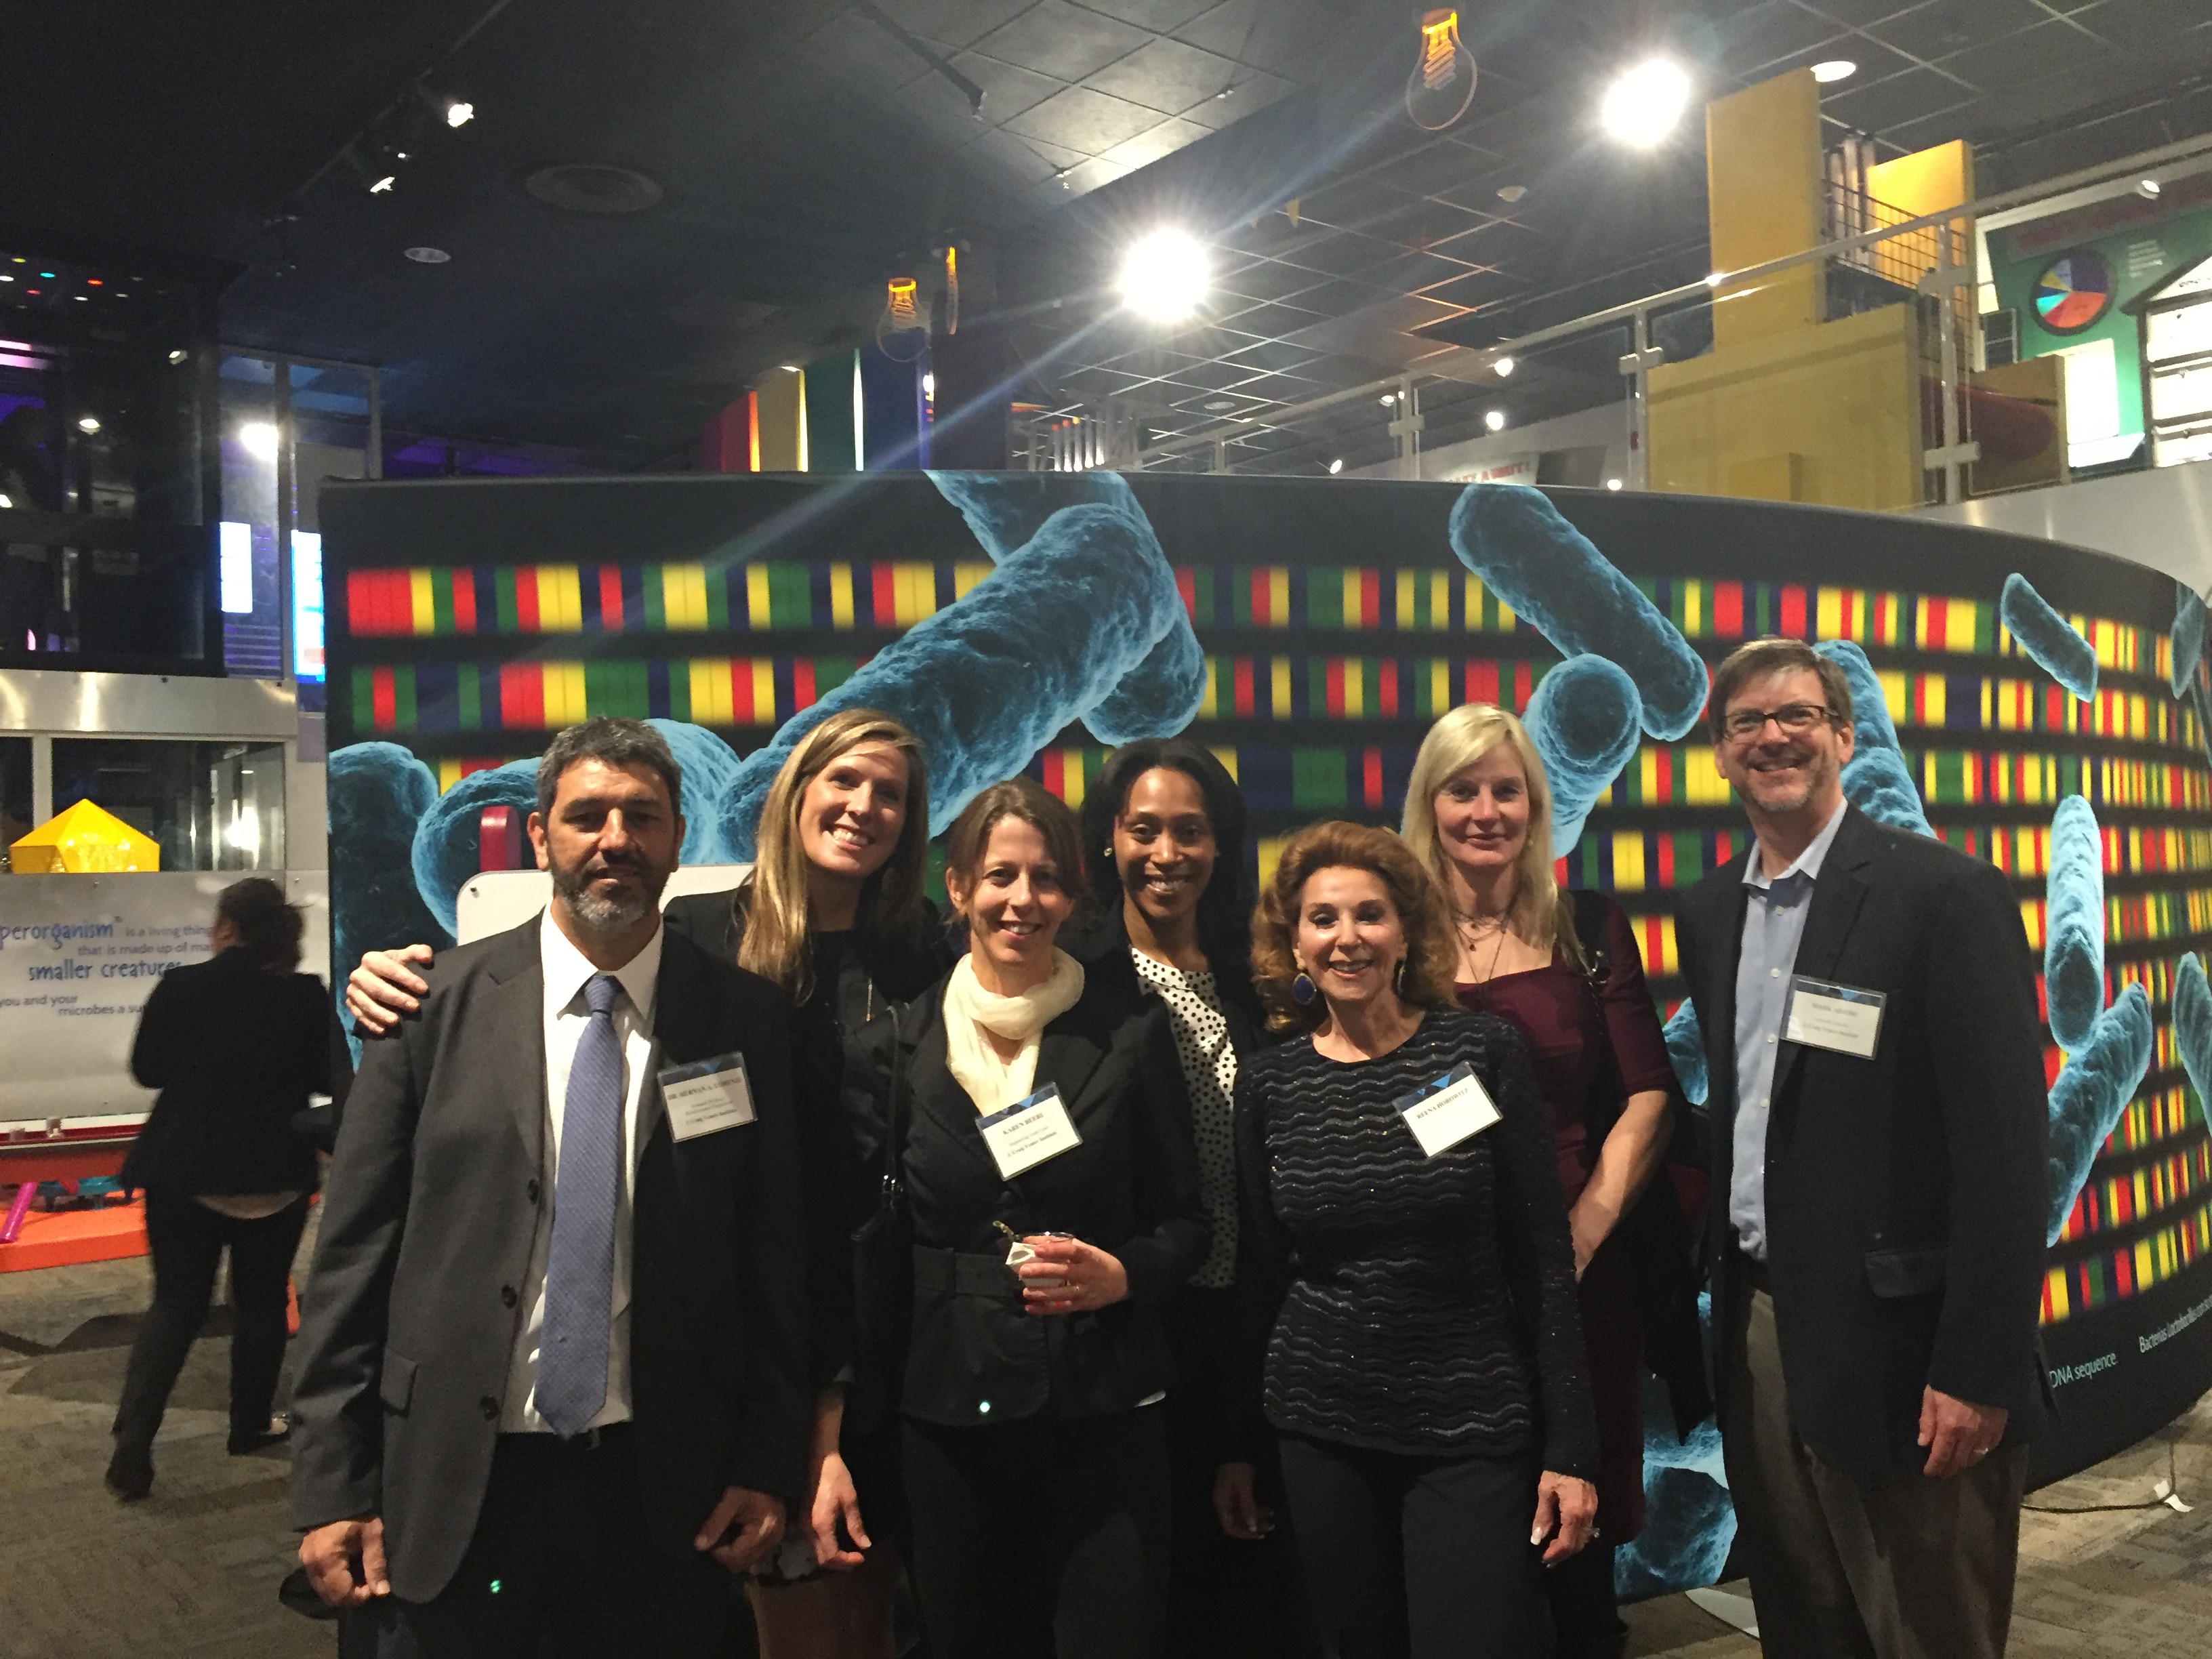 JCVI staff and friends came out to support the event (from left to right): Hernan Lorenzi, Katie Collins, Karen Beeri, Amani Rushing, CEO Council Member Reena Horowitz, Nicole Deberg, Mark Adams.